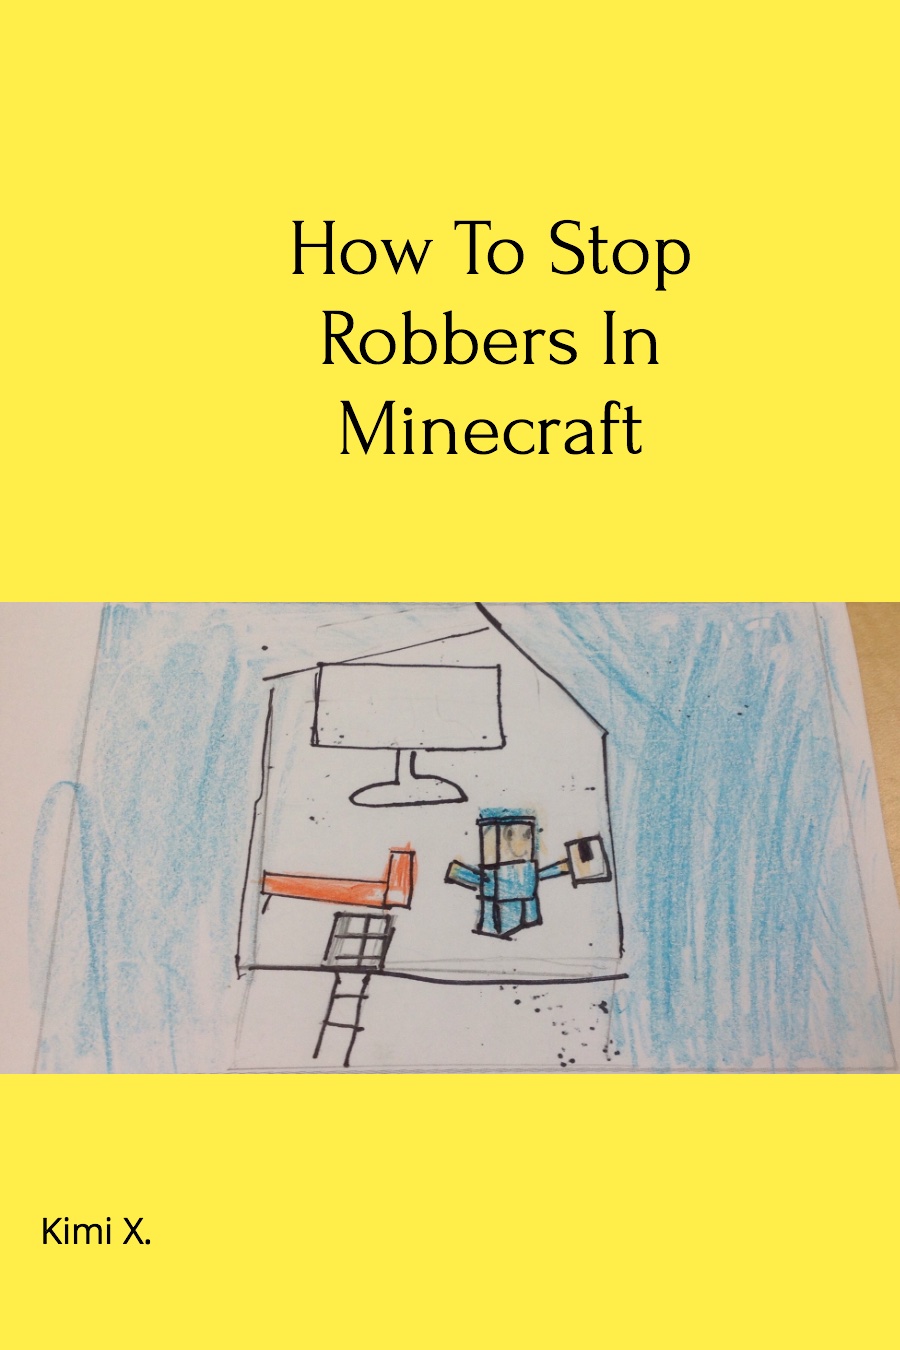 How to Stop Robbers in Minecraft by Kimi X